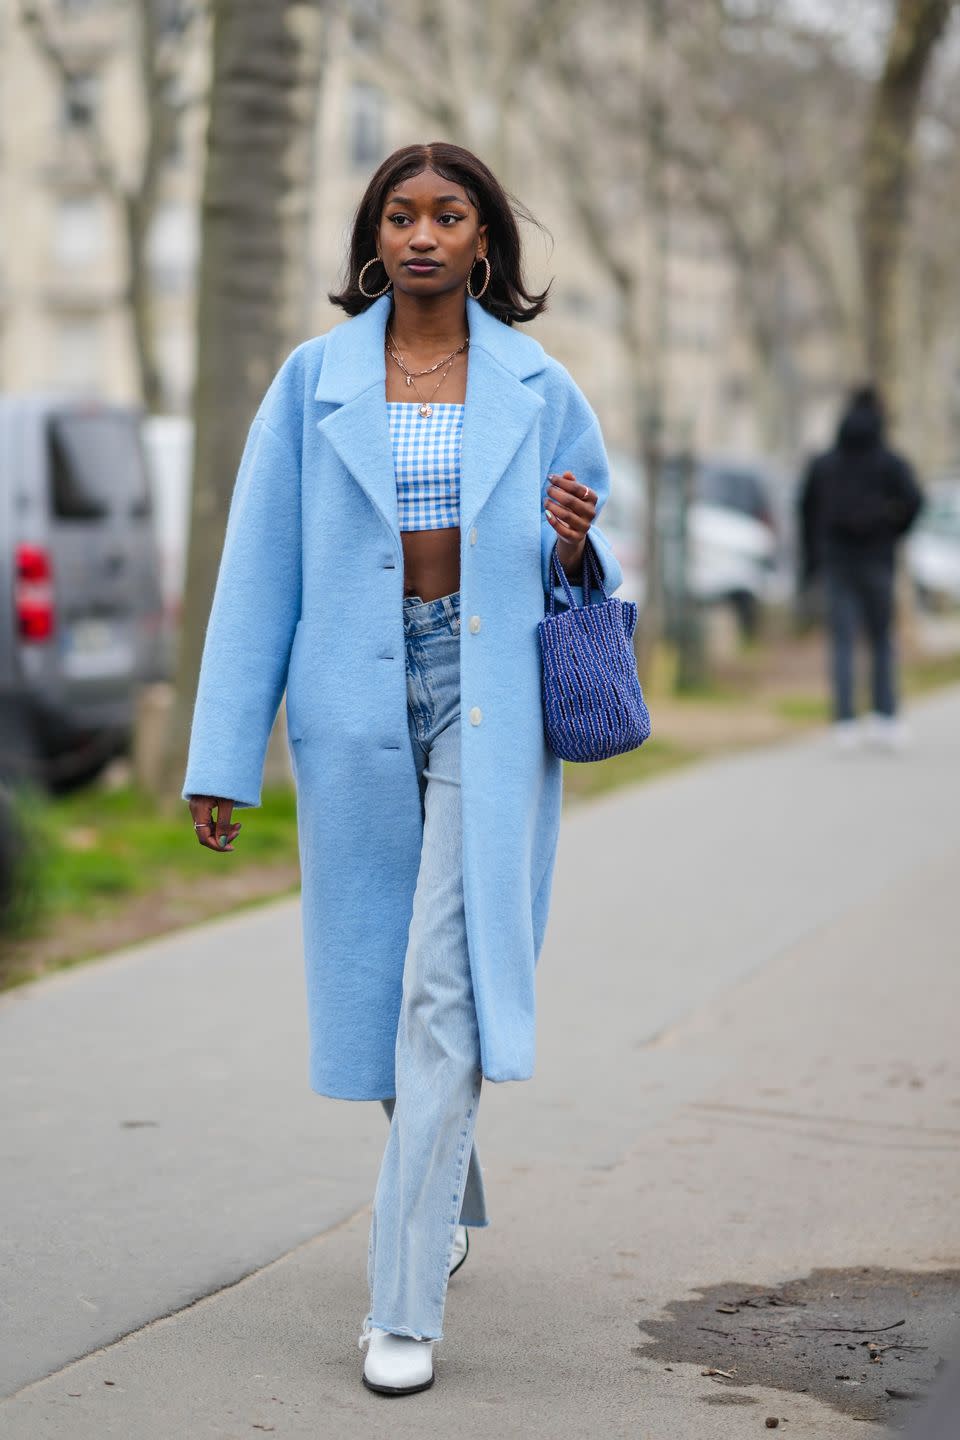 <p>Dressing head-to-toe in one shade is a surefire way to make your outfit look more expensive – we love this blue look of staple jeans and a powdery blue overcoat. </p><p><a class="link rapid-noclick-resp" href="https://www.harpersbazaar.com/uk/fashion/style-files/g36775/one-tone-dressing/" rel="nofollow noopener" target="_blank" data-ylk="slk:HOW TO STYLE ONE-TONE DRESSING">HOW TO STYLE ONE-TONE DRESSING</a></p>